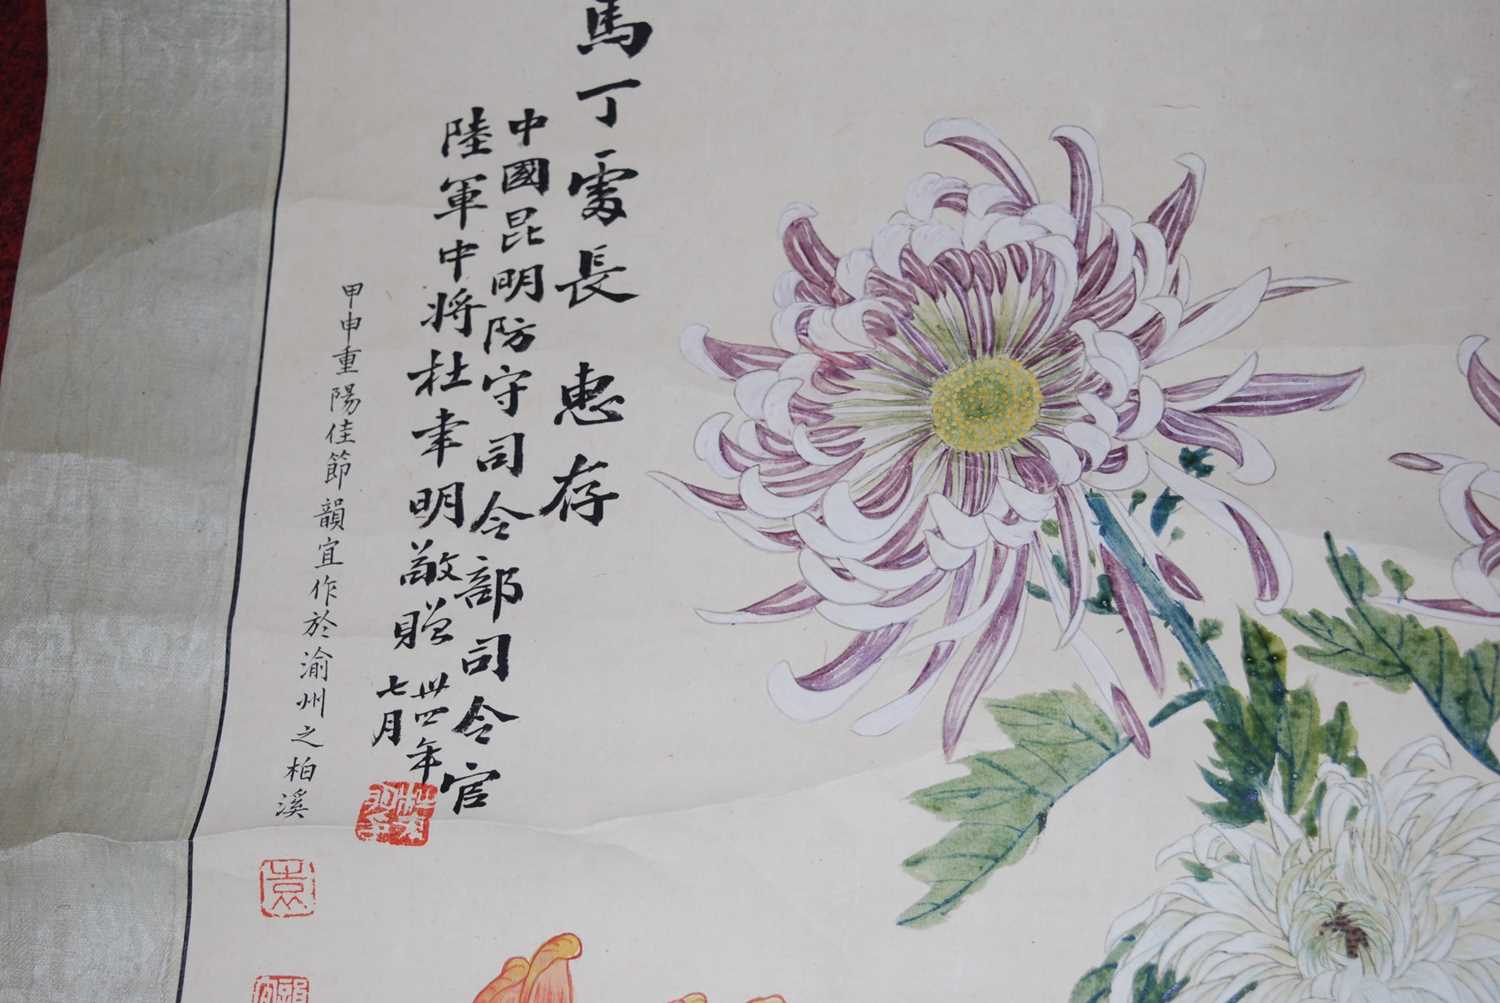 Yuan Yunyi (袁韻宜) (1920-2004) - Chrysanthemums, Republic of China scroll painting dated 1944, ink - Image 27 of 31